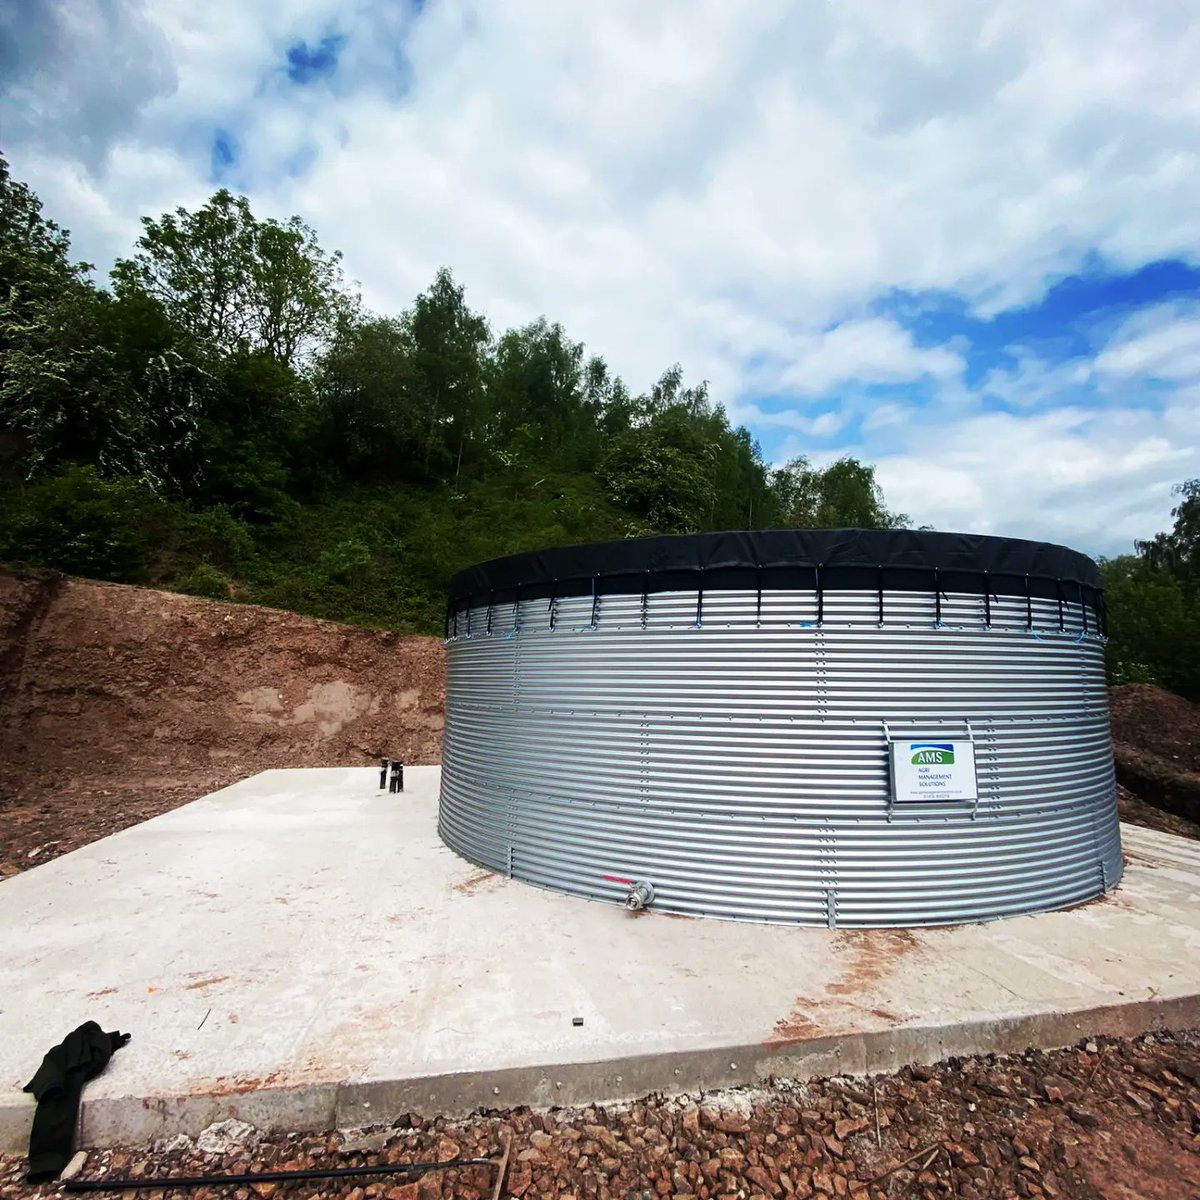 Another great install carried out by the AMS team.

#tank #watertank #watertanks #waterstorage #galvtank #savingwater #cleanwater #ams #watersolutions #watermanagement #watersystems